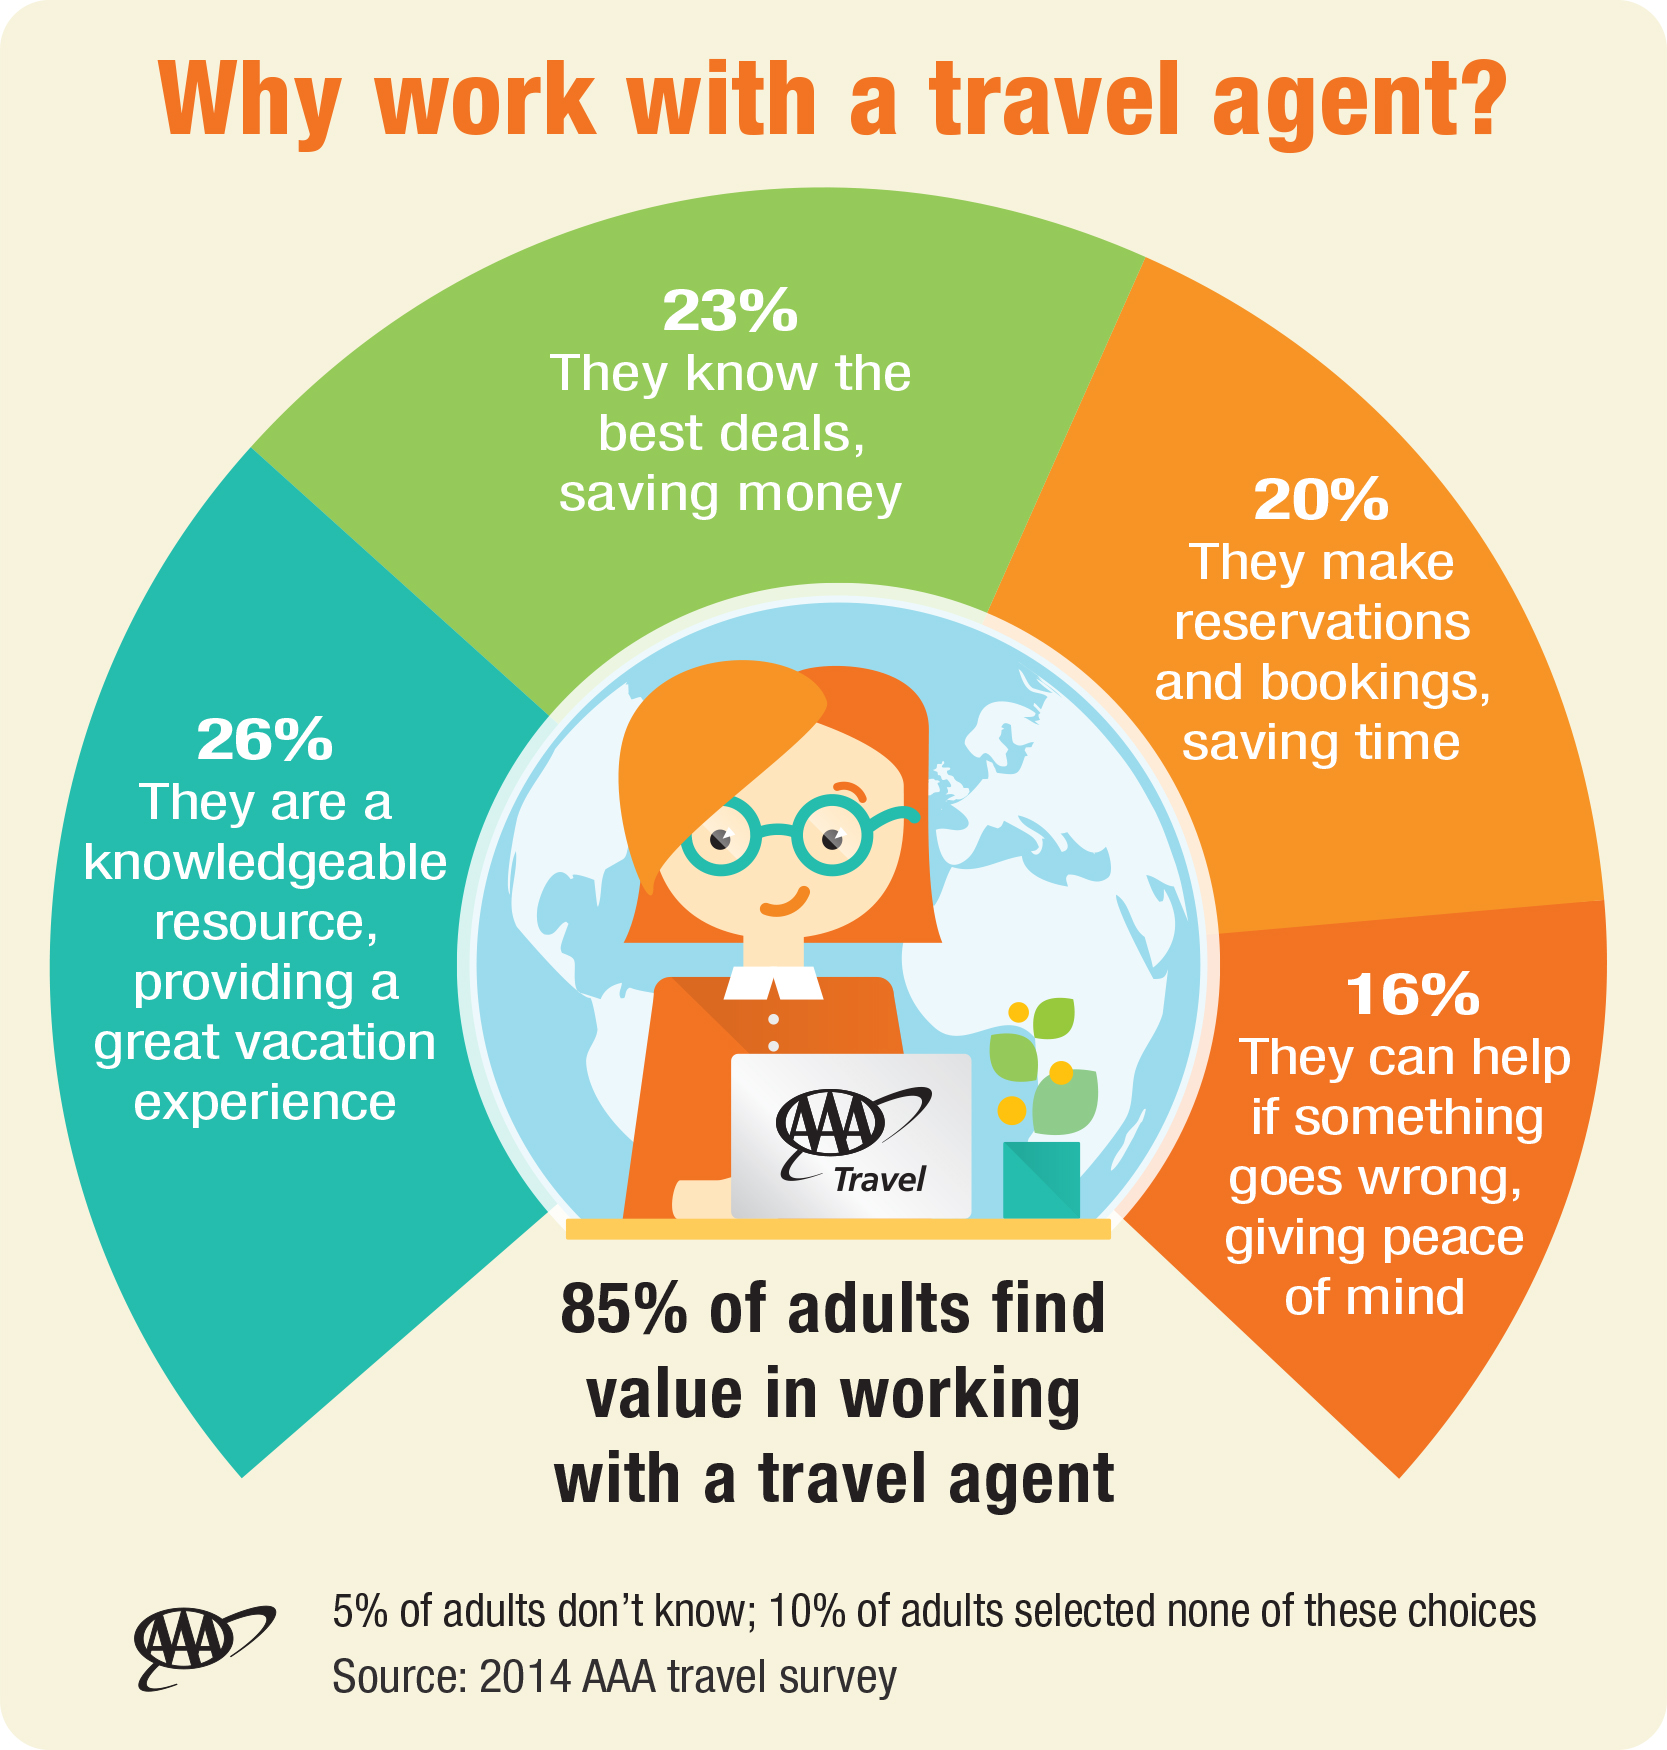 perks of using a travel agent benefits to using a travel agent travel agent best travel agents travel plan your travel tour agent travel booking agent your trip a travel agent travel professional plan travel international travel agent do travel agents travel trip agent find a travel agent the travel agent travel agent benefits i need a travel agent travel agent perks using a travel agent vacation agents travel best benefits of using a travel agent be a travel agent plan your travel your travel agent family travel agent travel agent do get your travel travel agent office travel agent for international travel book with a travel agent family vacation travel agent benefits of booking with a travel agent travel agent is need a travel agent all inclusive travel agents vacation booking agent vacation travel agent travel agent help tour and travel agent all travel agents best family travel agents international travel booking agents travel agents in travel agent books travel agent blog the best travel agent professional travel agent about travel agent best books for travel agents perks of travel agent find me a travel agent tour travel agent best all inclusive travel agents your trip agent at the travel agent best travel agents for international travel get a travel agent to be a travel agent benefits for travel agents travel agent trips travel agent itinerary travel travel agent a travel agent is find a travelers agent best international travel agents agents tour perks of a travel agent travel agent travel as a travel agent traveling travel agent travel agent about me travel and tour agent about me travel agent travel agents by me for travel agents help for travel agents which best travel agents travel agents for all inclusive vacations travel agent benefits perks travel agent agent travel agent tour best travel agents to book with perks of booking with a travel agent travel agent for international tour agents which travel agent travel agent professional all about travel agents travel agent and travel agent to find travelers agent best vacation travel agents perks for travel agents travel to agent travel agent your travel your trip a travel agent travel professional benefits of using a travel agent travel agent benefits travel best the travel agent your travel agent travel agent perks be a travel agent using a travel agent benefits of booking with a travel agent travel agent is travel agent do perks of using a travel agent book with a travel agent vacation travel agent travel agent help benefits for travel agents about travel agent perks of travel agent your trip agent at the travel agent travel agent trips travel travel agent a travel agent is find me a travel agent agents tour perks of a travel agent travel agent travel as a travel agent get a travel agent to be a travel agent for travel agents which best travel agents travel agent benefits perks travel agent for benefits to using a travel agent best travel agents to book with perks of booking with a travel agent best travel agency travel sites online travel agent best travel sites travel tours top travel top tours tour agency top travel agencies tour and travel agency best tour packages best tours best holiday packages best tour companies swan tours travel experiences best online travel agency best tours and travels the best travel agency holiday travel agency vacation tours tour travel agency trip agency get travel top online travel agencies travel agency india best travel tour companies travel top 4 travel travel agency company best travel company travel agency packages travel agency and tour operator apa itu travel agent top tour companies benefits of using a travel agent 2021 famous travel agency best tour operators best india tours best trip packages best place for tour trip travel agency trip tours best tour companies for india travel tour agency popular travel agencies india best travel agency trip top travel best travel tours vacation agent india tour agency agent trip vacation experiences travel agency tour packages best tour and travel company best holiday agents best tour agency best tour travel india top travel agency booking travel agent tours and travels agency top tour agency top tour operators best india tour packages best tours 2021 best vacation travel agency the best tours do tours travel agency vacation packages best vacation tour companies top india tours popular tours and travels travel agency tour operator best holiday packages company best tour booking sites help travel top travel tour companies popular tours tours holiday packages best tour travel agency best vacation tours best holiday tour packages top vacation travel agency india tour and travel company top tours travel best holiday travel agents best travel agent companies travel agent offers offer tours best tour and travel agency top 5 travel agencies tour the best looking for a travel agent most popular travel agencies best site for tour packages travel agent 2021 travel agent experience most famous travel agency best travel operators best online tour booking sites travel vendor experience travel agency tour benefits tour packages agency best travel travel agency best travel agency for holiday packages tours and experiences the best tour companies sites travel best holiday trip top tours and travels best holiday packages india top tours travel agency online tour agency trip booking travel agency best travel agency for vacation packages online travel agency benefits top travel tours 4 trips top travel agent companies tours tour travel agent s tours and travels companies popular tour companies best vacation agency best site for trip packages travel is the best top vacation agency best travel agency sites do travel agent travel tour operator agency india's best tours and travels benefits of having a travel agent the best online travel agency travel agency famous best tour sites best tour holiday best travel and tour best trip companies most popular tours india best travel company most popular online travel agencies travel agency for tour packages best tours and travels packages top tour and travel companies top sites for booking tours best online travel agency for vacation packages best travel tour packages travel agency travel agency top tour travel companies recommended tours most popular tour operators best agency travel travel agency holiday packages travel ah 5 travel agencies india tour trip travel agent money travel company tours travel on tours best trips from india tours visit best travel tour operators travel agency travel packages best tour package company best india trip the best travel tour companies on tour travel agency top 5 online travel agencies best tour operator india travel agencies and tour operations online travel agent india be an online travel agent holiday vacations travel agency top agency travel best travel agency to book a vacation top tour packages best travel agency to use top tour travel companies india best travel experts india tour & travel agency perks travel agency best vacation tour packages holiday india travel agency best travel tour sites travel agencies and tour which travel agents best india travel packages best tour offers most popular tour companies best travel booking agency top vacation tour companies top agent travel best tour trips top trip tours & travels book a trip travel agency travel best tours best travel agency tour and travel agency a travel agent the best travel agency tour travel agency trip agency get travel the travel agent benefits of using a travel agent travel agent benefits using a travel agent travel best trip travel agency travel tour agency be a travel agent travel agent do best tour agency benefits of booking with a travel agent travel agent is book with a travel agent trip booking travel agency best tour travel agency best tour and travel agency travel agent trips best travel travel agency find me a travel agent get a travel agent to be a travel agent benefits for travel agents travel agency travel agency best agency travel a travel agent is agents tour travel agent travel as a travel agent for travel agents best travel agency to use benefits to using a travel agent which best travel agents on tour travel agency best travel agents to book with best travel booking agency travel agent for travel agencies and tour book a trip travel agency travel agency my travel travel service booking travel tour agencies travel manager travel booking agent flight agency travel agency flights travel agency services flight booking agents hotel agent travel agency manager travel for you tours best travel agency for flights my travel agent agent get my trip at the travel agency hotel booking agents i need a travel agent find a travel agent hotel travel agent good travel agencies about travel agency my trip travel agency do travel agents travel travel agent flight booking travel agency industry best travel advisors travel travel agency best my flight agent use it travel travel agency in tour and travel agent best flight agency need a travel agent hotel booking travel agency best travel agent for flight booking best flight booking agency book it travel agency travel agents in travel agent books for you tours travel by you travel agency agent in a travel agency a travel agency is agency for flight booking a good travel agency get travel agency best books for travel agents travel and agency travel on travel agency at travel agency travel service agency my trip agency book hotel agency travel agency for booking flights travel agent advisor trip advisor travel agent in travel agency best hotel booking agency booking agents for flights use my trip travel and travel agency best travel agency to book flights travelers travel agency flight booking for travel agent best agency to book flights my trip travel agent find a travelers agent agency trip traveling travel agent travel book agency the travel advisor travel agent about me as travel agency about me travel agent travel agency i agent for hotel booking travel agents by me finding a good travel agent agent hotel booking services of a travel agent do you travel agency travel to do agence travel with travel agency it travel agency travel agent agent travel agencies and travel management travel agency for i need a good travel agent travel agent travel agency which travel agent best travel agency in travel agent and travel agent to find travelers agent travel industry agency travel to agent hotel by agency travel agency online travel agent best travel agency travel sites best online travel agency a travel agent airline agency the best travel agency airline travel agency about travel agency do travel agents travel the travel agent good travel agencies at the travel agency travel agency sites i need a travel agent travel agency industry be a travel agent travel travel agency travel agency in online travel industry travel agent is travel agent do travel agent help travel agents in travel agency agent in a travel agency a travel agency is the travel experts get travel agency travel and agency need a travel agent online travel agency industry travel on travel agency at travel agency travel by you travel experts online in travel agency best travel agency sites travel and travel agency the best online travel agency travelers travel agency a travel agent is travel agent travel goods travel agency as a travel agent a good travel agency as travel agency best travel travel agency get a travel agent to be a travel agent travel agency travel agency travel agency i expert travel agency for travel agents best agency travel help for travel agents site travel agency best airline agency do you travel agency travel to do agence online agency travel traveling travel agent travel with travel agency agent travel online it travel agency travel agent agent be an online travel agent travel agency for travel agent for best travel experts travel agent travel agency edu travel agency which best travel agents which travel agent travel agent to travel industry agency i need a good travel agent online travel agent sites moree travel agent best travel agency in travel agent and travel experts travel agency travel to agent travel agents for airlines travel agency best travel agency a travel agent airline agency the best travel agency about travel agency do travel agents travel the travel agent airline travel agency at the travel agency travel travel agency travel agency industry be a travel agent travel agent is i need a travel agent travel agency in travel agent do travel agents in travel agency agent in a travel agency travel and agency travel on travel agency a travel agency is get travel agency in travel agency need a travel agent at travel agency travel and travel agency travel by you a travel agent is travel agent travel as a travel agent as travel agency best travel travel agency to be a travel agent travelers travel agency travel agency travel agency for travel agents get a travel agent travel with travel agency it travel agency travel agency i expert travel agency best agency travel travel agency for travel agent for best airline agency do you travel agency travel to do agence traveling travel agent which best travel agents travel agent travel agency travel agent and travel agent to travel industry agency best travel experts travel experts travel agency best travel agency in travel to agent travel agents for airlines tour agency tour and travel agency cruise travel agent travel agency business host travel agency business travel agency tour travel agency carnival travel agent virtual travel agent carnival cruise travel agent travel hotels travel agency and tour operator travel offers destination travel agency cruise agents vacation travel agency air travel agency hotel agent host agency for travel agents travel agency packages vacation agencies benefits of using a travel agent car travel agency travel operators travel tour agency travel agent benefits find a travel agent travel and tourism agency best cruise travel agent hotel travel agent travel agency operations new travel agency travel agency offers using a travel agent travel agent news travel agency tour packages use it travel carnival cruise agent carnival cruise line travel agent reasons to use a travel agent best host travel agency tours and travels agency on line travel agents travel agency vacation packages find a host travel agency travel agency tour operator host travel best host agency for new travel agents best travel agent host agency punta cana travel agency best tour agency cruise line travel agents travel agency car rental tour packages agency travel tour operator travel agency in tourism cruise ship travel agent carnival agents travel agent s benefits for travel agents best cruise agents travel expert agency travel agencies on line best vacation travel agency best tour travel agency destination vacation travel agency travel agency in tourism industry tour operator agency travel agency car find me a travel agent vacation rentals for travel agents travel agent video best tour and travel agency the host agency travel agency for tour packages best travel agency for vacation packages s travel agency best vacation agency travel agents on line find a host agency travel vendor travel and tourism agent best car for travel agency destin travel agent travel agency destinations packages travel agency find a travelers agent agents tour travel agent vendors carnival cruise line agent travel destinations travel agency cruise line agent travel agent about me travel agency travel packages travel agency on line about me travel agent car for travel agency travel agents by me airport travel agent travel agency agency about travel agency business carnivals travel agency travel agency and tour operator business reasonable tour packages agency for tourism travel agency host agency 11 travel benefits of travel agency business cruise host agency reasons to be a travel agent host agency for new travel agents business to business travel agency best business travel agency on tour travel agency travel agencies and tour operations which travel agents reasonable vacations best travel agency to use travel agent for punta cana travel agency cruise packages travel ah benefits to using a travel agent travel car agency air tour travel agency travel expert cruise best travel agency for punta cana travel agencies and tour host and travel find travelers agent best cruise line travel agents punta cana agency travel agents travel and tourism the best host agency for travel agents the best host travel agency travel agent for cruise ships find a cruise travel agent best travel agent for carnival cruises cruise and tour travel agency destinations to travel travel agency a business travel agent hotel by agency reasonable travel agents best carnival cruise travel agent cruise it travel agent best travel agency tour and travel agency tour agency tour travel agency a travel agent vacation travel agency the best travel agency find a travel agent do travel agents travel vacation agencies the travel agent travel tour agency travel agency offers travel and tourism agency travel travel agency about travel agency i need a travel agent at the travel agency be a travel agent using a travel agent travel agent news travel agency industry tours and travels agency travel agent do new travel agency travel agency in travel agent is travel agents in travel agency in tourism best tour agency get travel agency need a travel agent travel expert agency best vacation travel agency best tour travel agency travel on travel agency travel agency agent best tour and travel agency in a travel agency travel agent s a travel agency is best vacation agency travel vendor travel and travel agency travelers travel agency a travel agent is travel and agency find me a travel agent at travel agency travel agent travel travel agent about me travel and tourism agent get a travel agent best travel travel agency to be a travel agent in travel agency s travel agency about me travel agent travel agency travel agency expert travel agency travel agency in tourism industry for travel agents best agency travel find a travelers agent agents tour travel agent vendors do you travel agency travel to do agence as a travel agent traveling travel agent travel with travel agency as travel agency travel agency agency on tour travel agency travel agency i travel agents by me travel agent for best travel agency to use travel ah best travel experts agency for tourism which best travel agents travel agencies and tour travel agent and which travel agents it travel agency travel agency for travel agent travel agency best travel agency in travel agent to find travelers agent travel industry agency travel agents travel and tourism travel experts travel agency travel to agent travel agent travel service top travel agencies in the world your travel top travel agencies world travel agency travel industry news travel agency usa american travel agency flight agency your trip trip agency travel booking agent travel trips travel agency flights travel agency services travel agent fees travel vacations travel agency hiring best travel agency for flights best travel agencies in the world best travel agency to work for trip travel agency travel pros travel agency about us flight booking agents your travel agent travel agent service fees travel agent work american vacations travel agent services offered by travel agency best travel agency in usa travel agent prices trip to us travel agency for flight booking world tour travel agency travel agent pros and cons work of travel agent top travel agencies in usa pros and cons of using a travel agent travel world travel agency be your own travel agent world of travel agency travel world agency hiring a travel agent travel to us news top travel agencies to work for book with a travel agent price travel agency book it travel agency best flight agency top tour agency travel agent advice vacation booking agent top vacation travel agency trip booking travel agency american vacations agent pros and cons of a travel agent best travel agent for flight booking your trip agent travel with us travel agency world travel travel agency tours us report travel agency world tour agency travel agent trips best flight booking agency tours of the world travel agent travel the world agency agent work and travel owning a travel agency tours for the world travel agent travel agent books tour agency in usa travel service agency travel agency report travel agencies to work for i work in a travel agency agency trip best travel agency in america top flight travel agency pros travel agency for flight booking own your own travel agency best books for travel agents top vacation agency work in the travel industry service offered in travel agency top tours travel agency best travel agency to book flights pros and cons of using travel agent the best travel agency to work for travel the world travel agency best tour agency in usa travel work agency pros and cons of booking with a travel agent top flight agency pros and cons travel agent agency travel usa travel agent fees for flights your own travel agency travel agent for booking flights flight booking for travel agent best world travel agency booking agents for flights top agency travel best travel agency to book a vacation best agency to book flights travel agency of usa us tours travel agency report travel agent services of a travel agent work and travel agent travel book agency travel agent booking fees travel agent booking fee top of the world travel agency best travel agents to book with best travel booking agency reporting a travel agency owning your own travel agency travel agent world services offered in a travel agency book a trip travel agency top agent travel flight expert agency a travel agent the travel agent travel agency travel agency travel agency agency host travel agency travel agency host agency reviews host agency for travel agents best home based travel agent companies best host travel agency hosting agency travel agent benefits host travel agency reviews find a host travel agency best host agency for new travel agents travel agency list best travel agent host agency top host travel agency top 10 travel agencies top 10 travel companies home based travel agent host agencies find a host agency best host agency travel agent host agency reviews travel agency host company top ten travel agencies top ten travel companies the host agency home based travel agencies travel agency start up travel agency host agency travel host companies best travel agency host company top host agencies agency host host agency for new travel agents travel agency start up costs host travel agency list travel agency top open your own travel agency the best host agency for travel agents the best host travel agency top 10 travel host agencies best home based travel agency host benefits of using travel agent disadvantages of using a travel agent benefits of using a travel agent 2023 advantages of using a travel agent benefits of using a travel agent 2023 perks of using a travel agent advantages and disadvantages of booking through a travel agency benefits of using a disney travel agent advantages of using travel agent disadvantages of booking through a travel agent benefits of having a travel agent advantages of travel agencies benefits of booking through a travel agent advantages and disadvantages of booking through a travel agent benefits to using a travel agent advantages of booking through a travel agent benefits of using disney travel agent benefits of using a travel agent for disney benefits of using a online travel agent benefits of booking with a travel agent benefits of working with a travel agent benefits of using a corporate travel agency benefits of using a travel agent advantages of using a travel agent benefit of travelling travel agent benefits